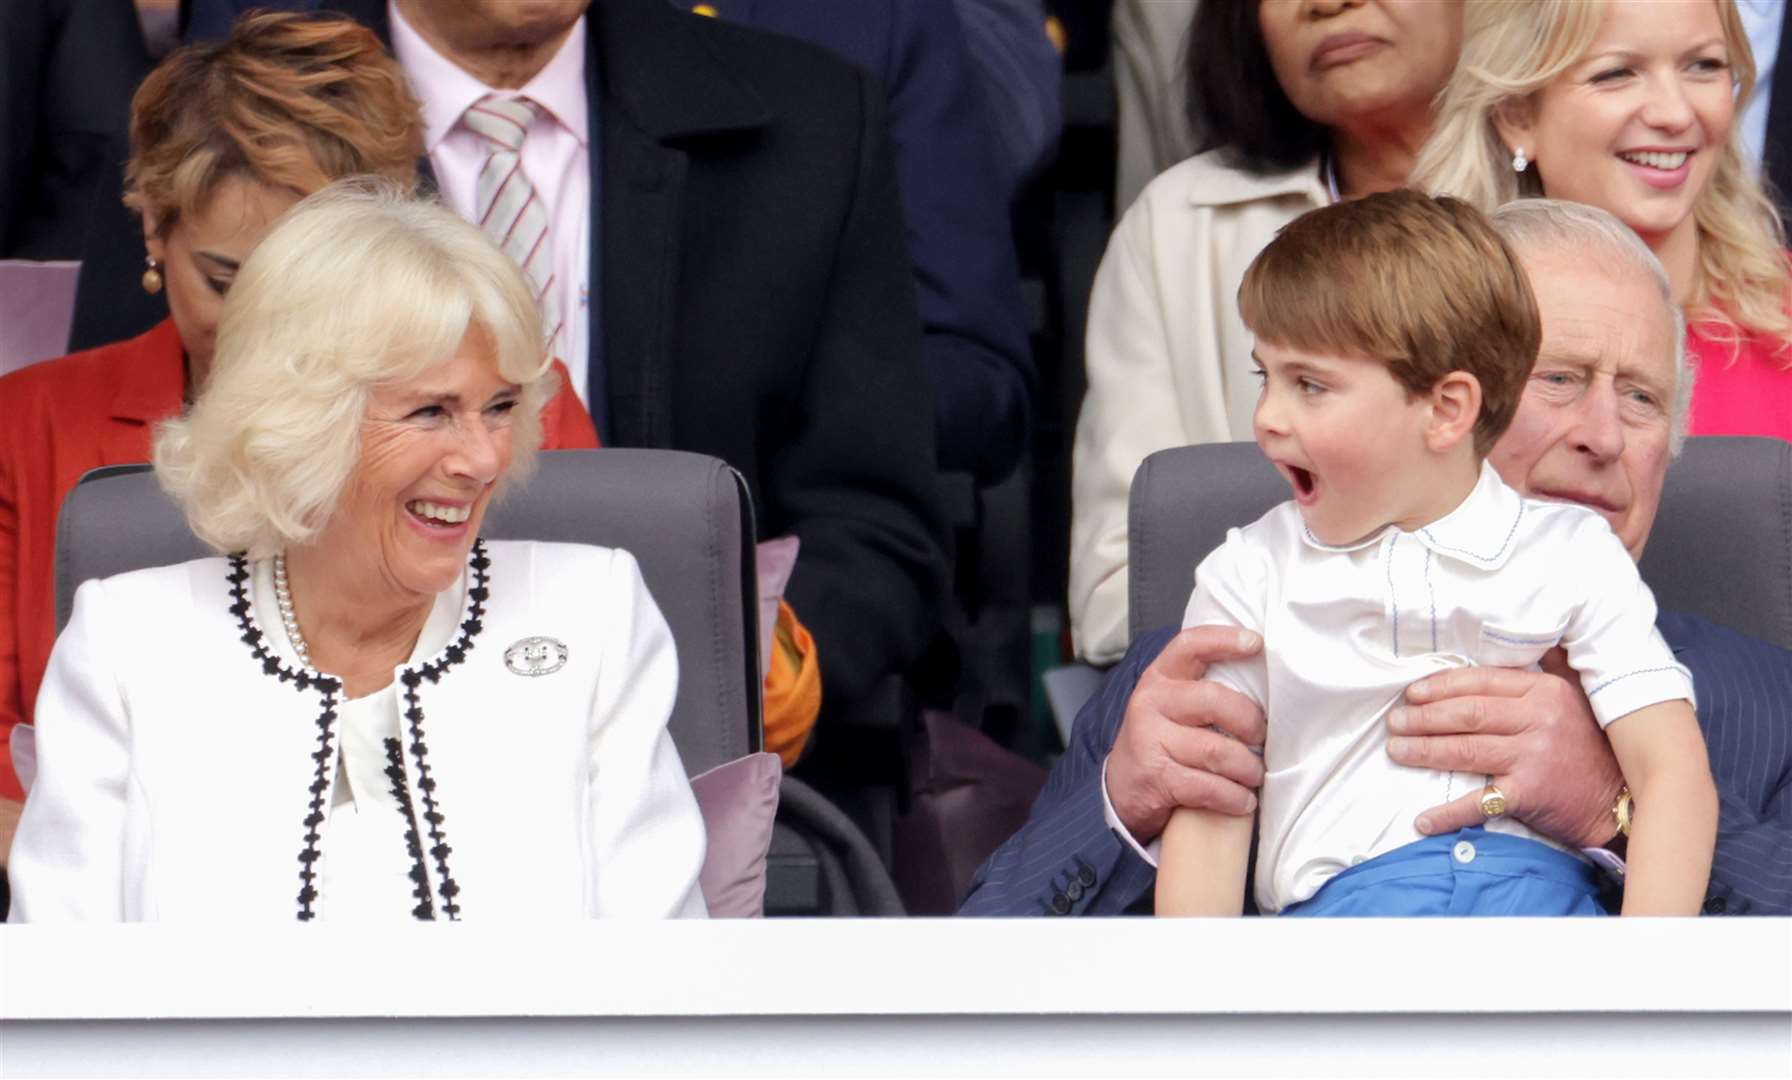 Camilla laughs with Prince Louis, who is held by Charles, during the Platinum Jubilee Pageant (Chris Jackson/PA)